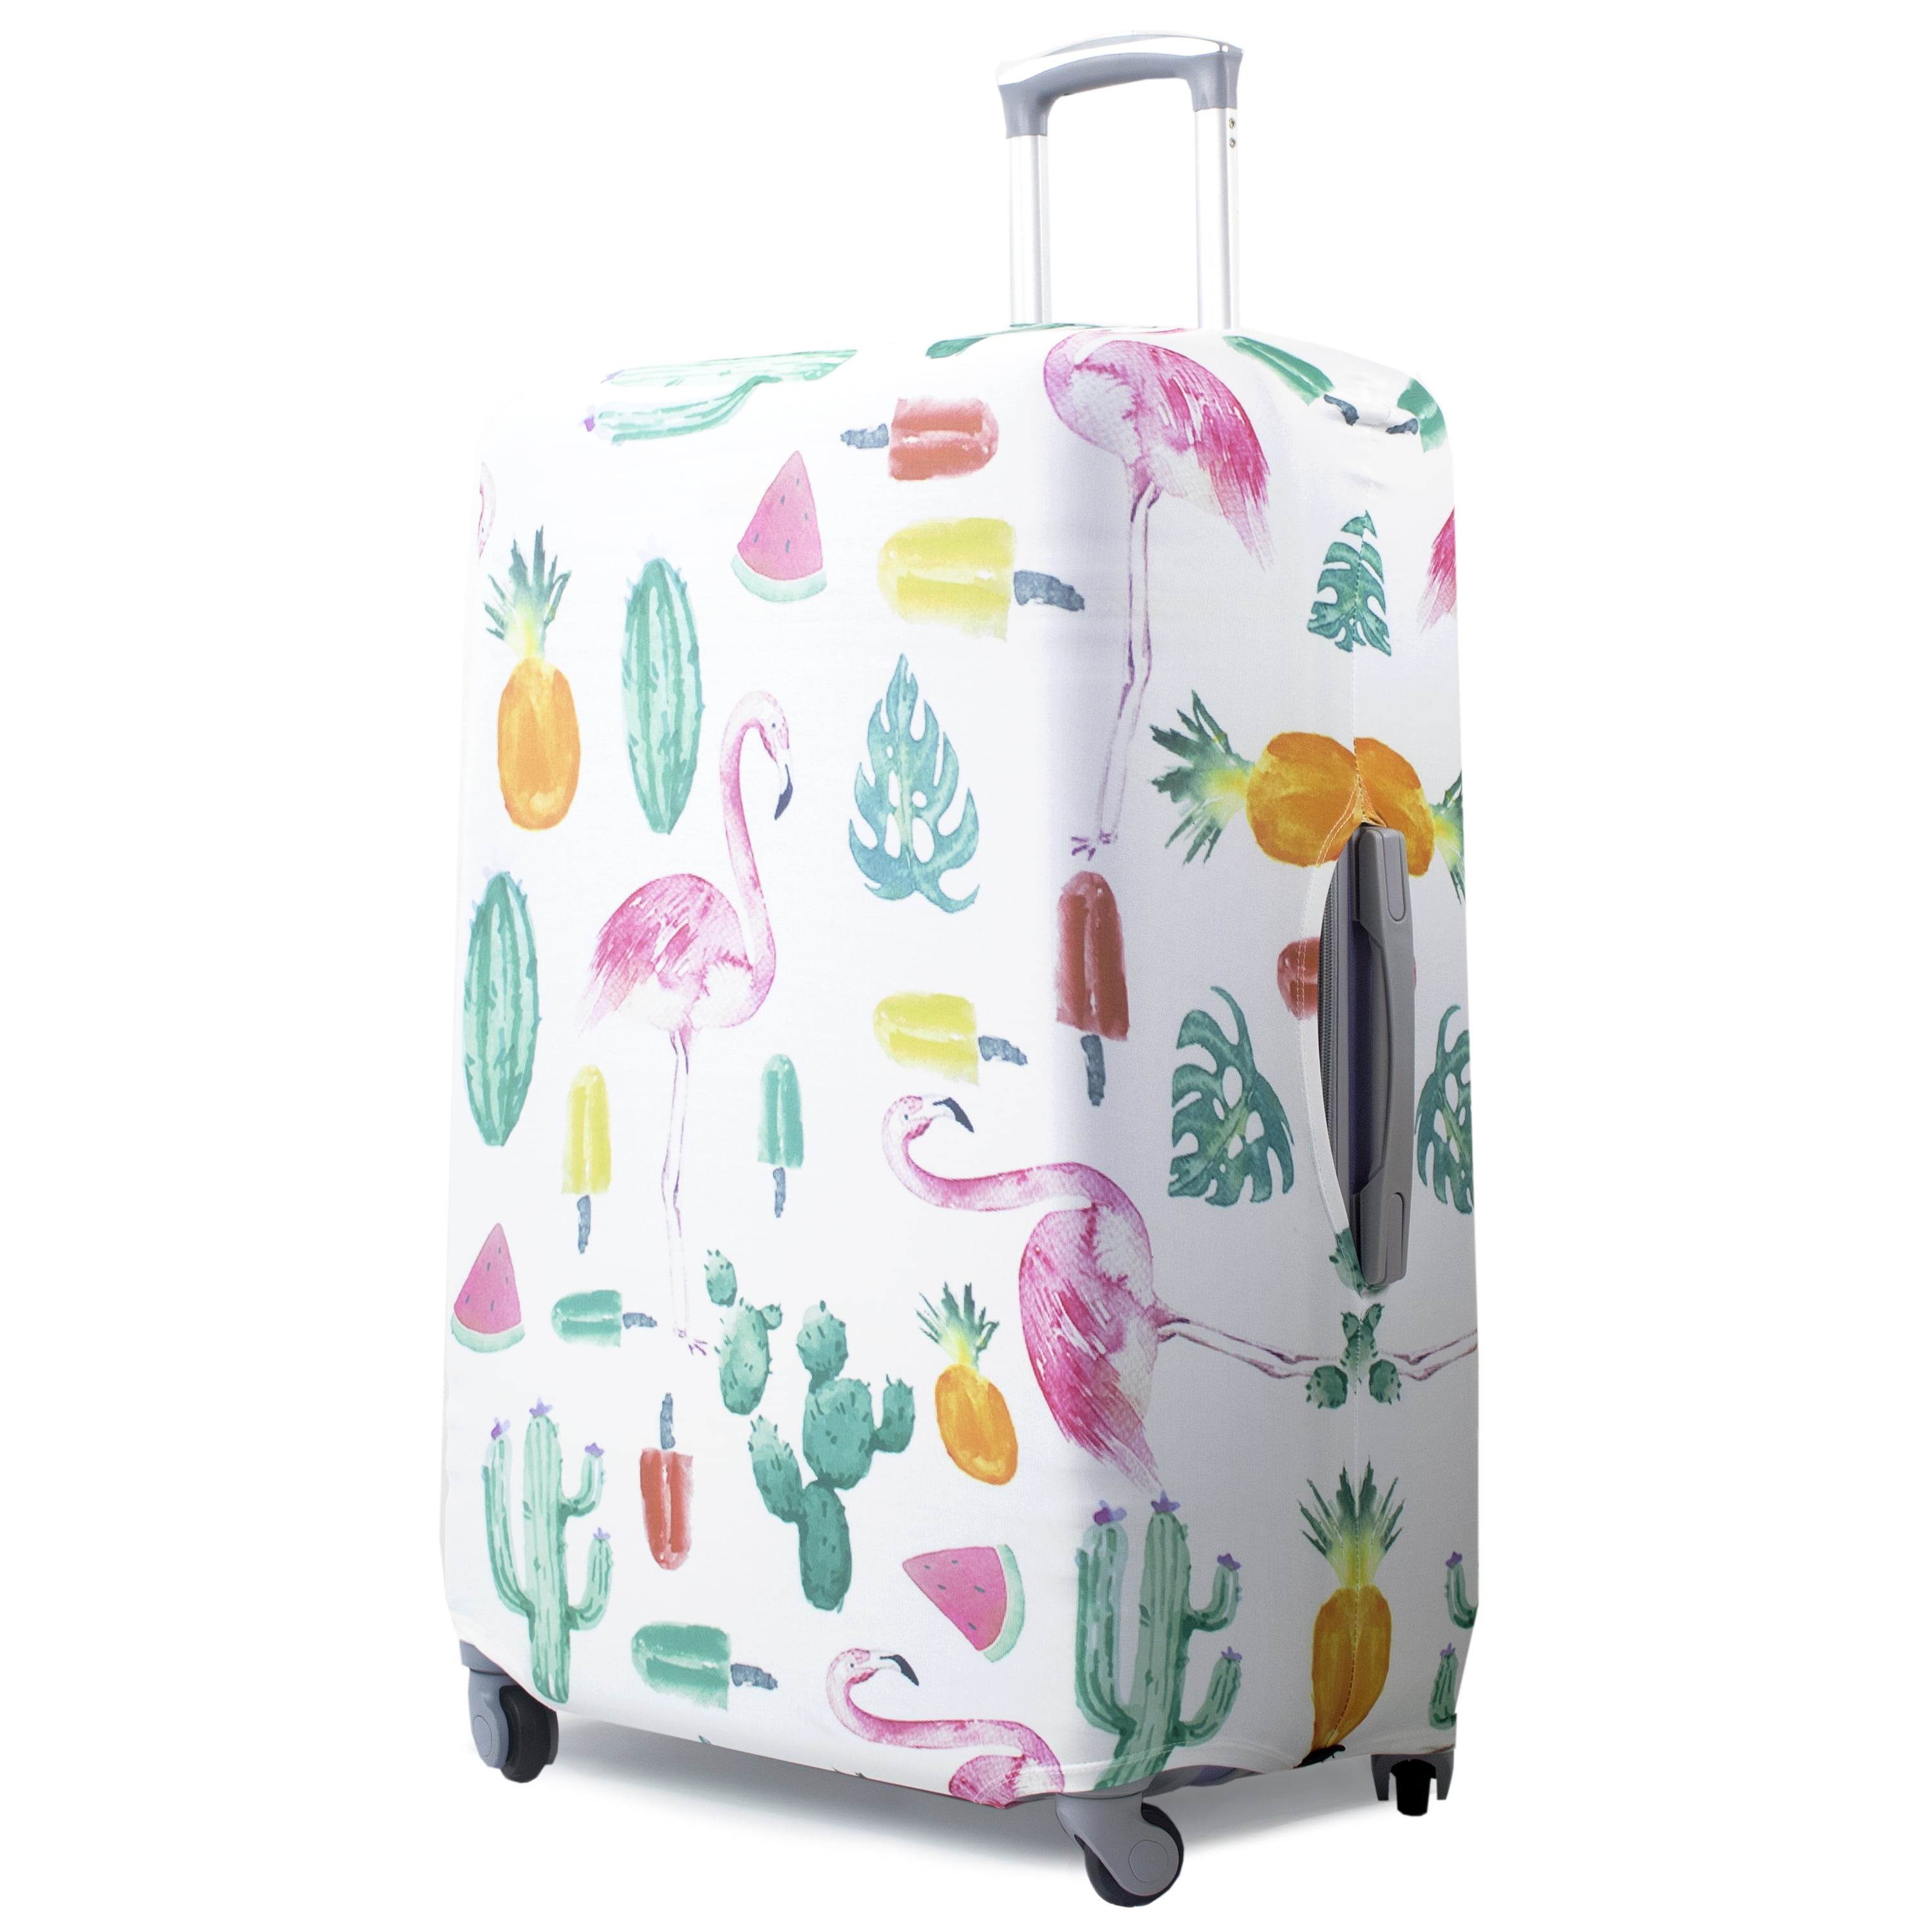 Elastic Travel Luggage Cover Floral Tropical Pink Flamingoes Blue Stripes Suitcase Protector for 18-20 Inch Luggage 